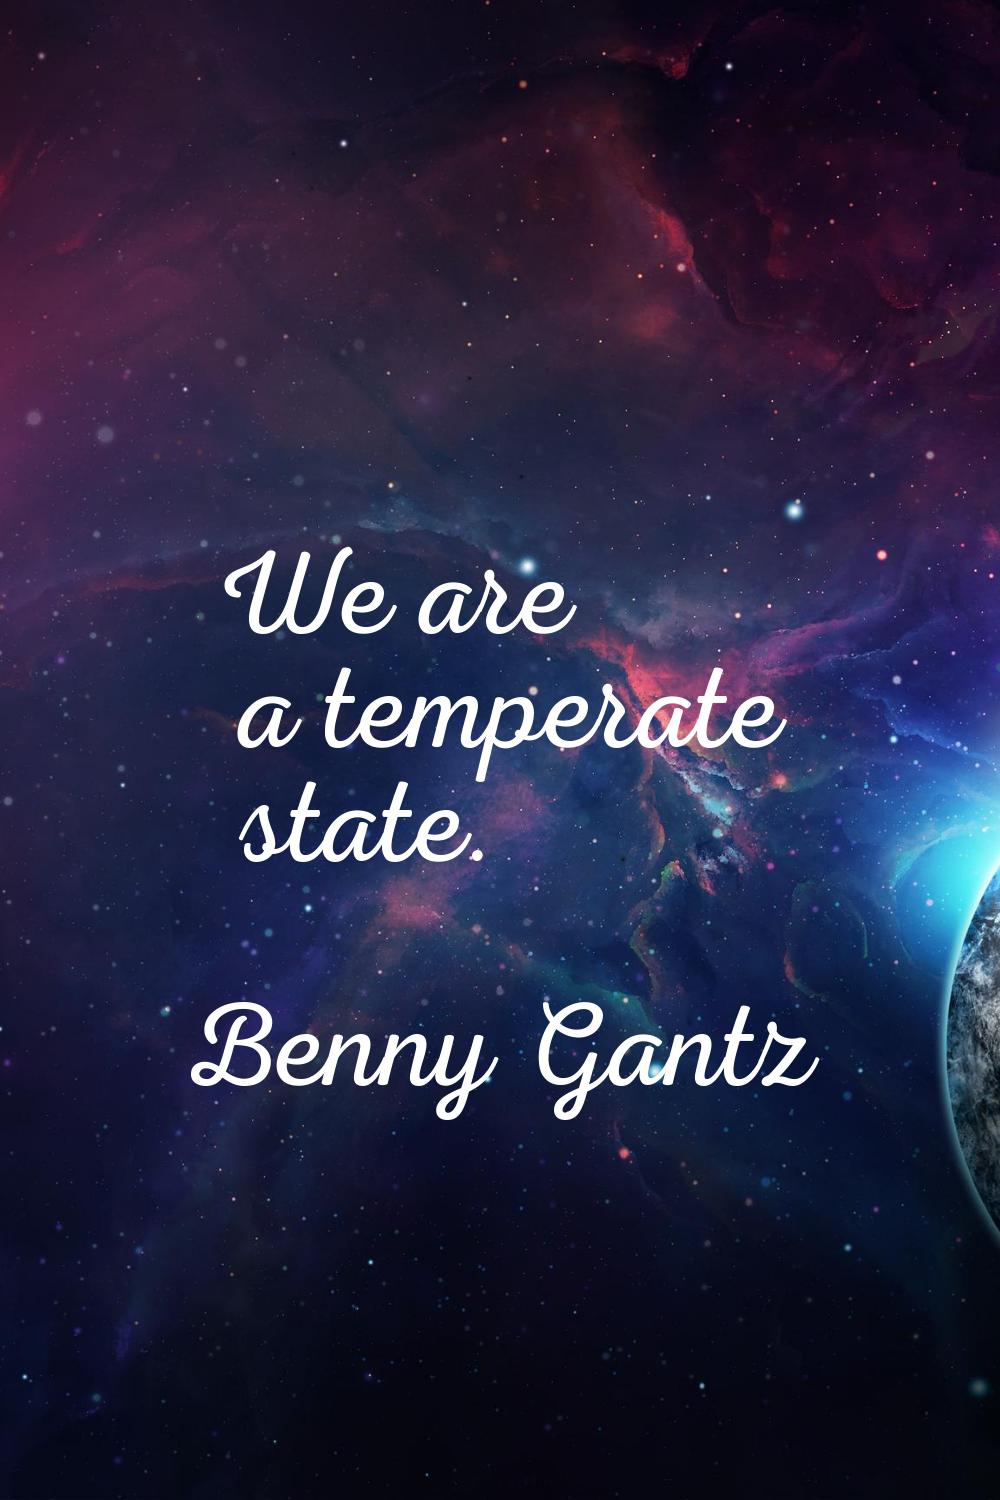 We are a temperate state.